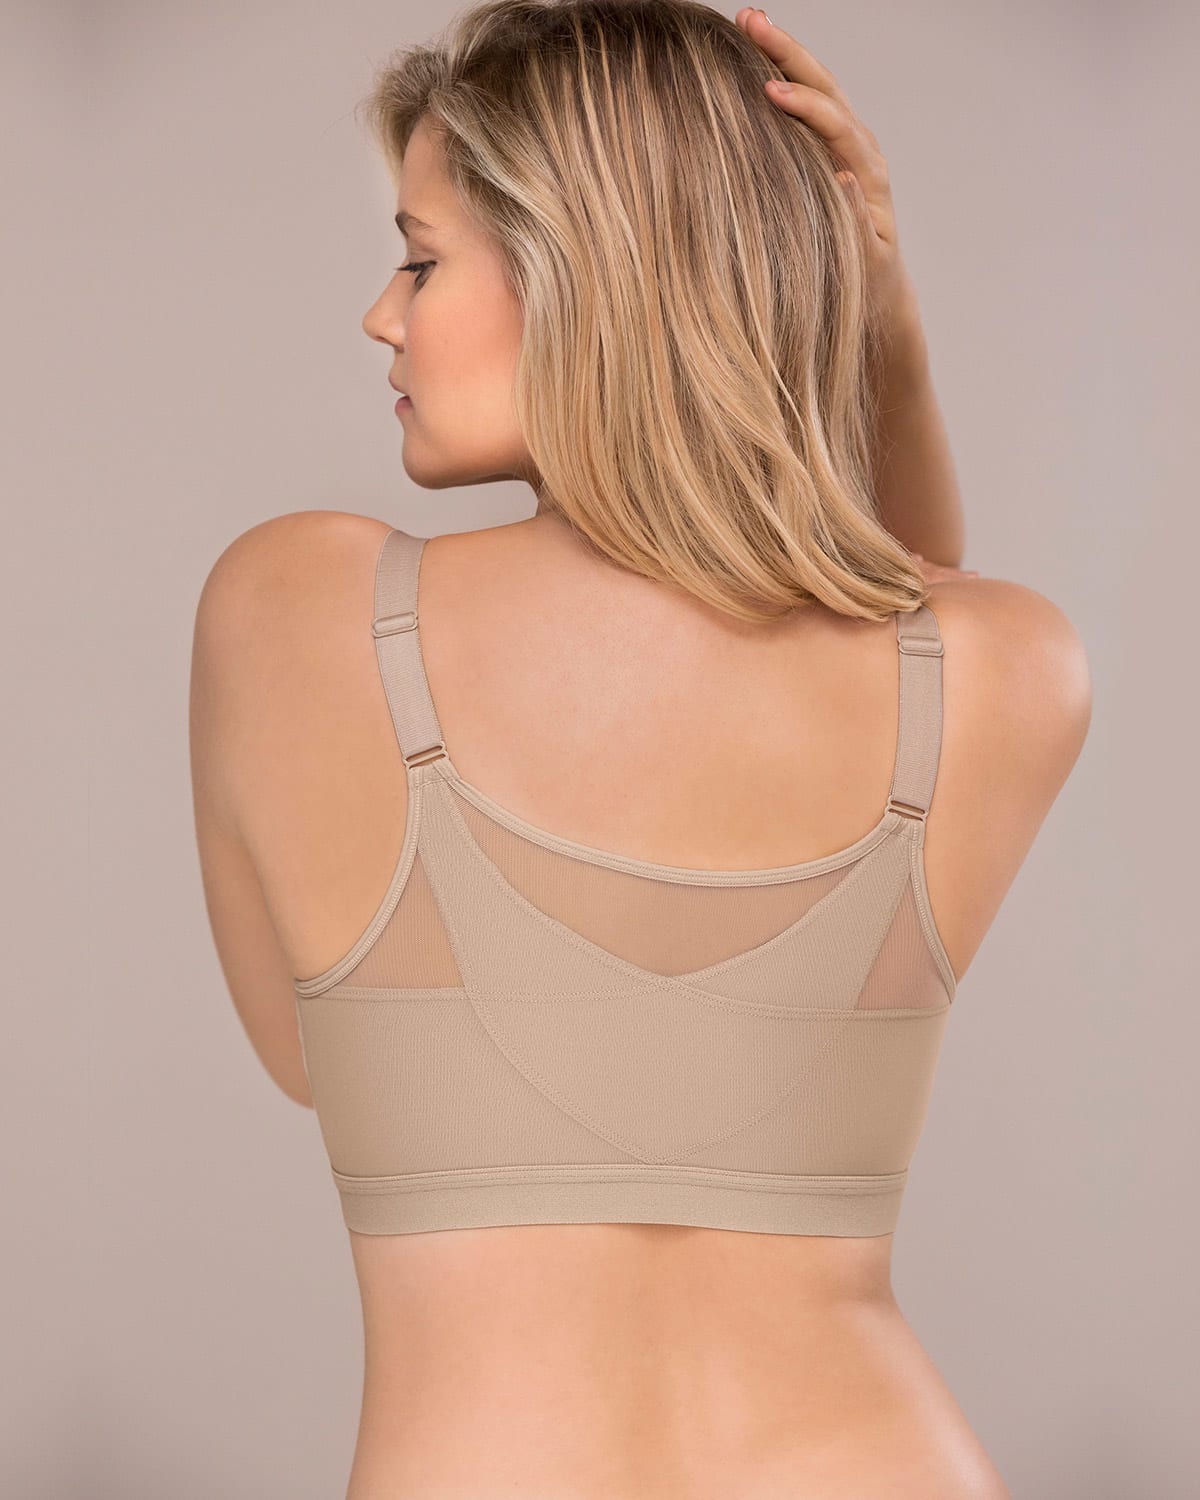 How To Find The Right Sports Bra for You – Bra Doctor's Blog